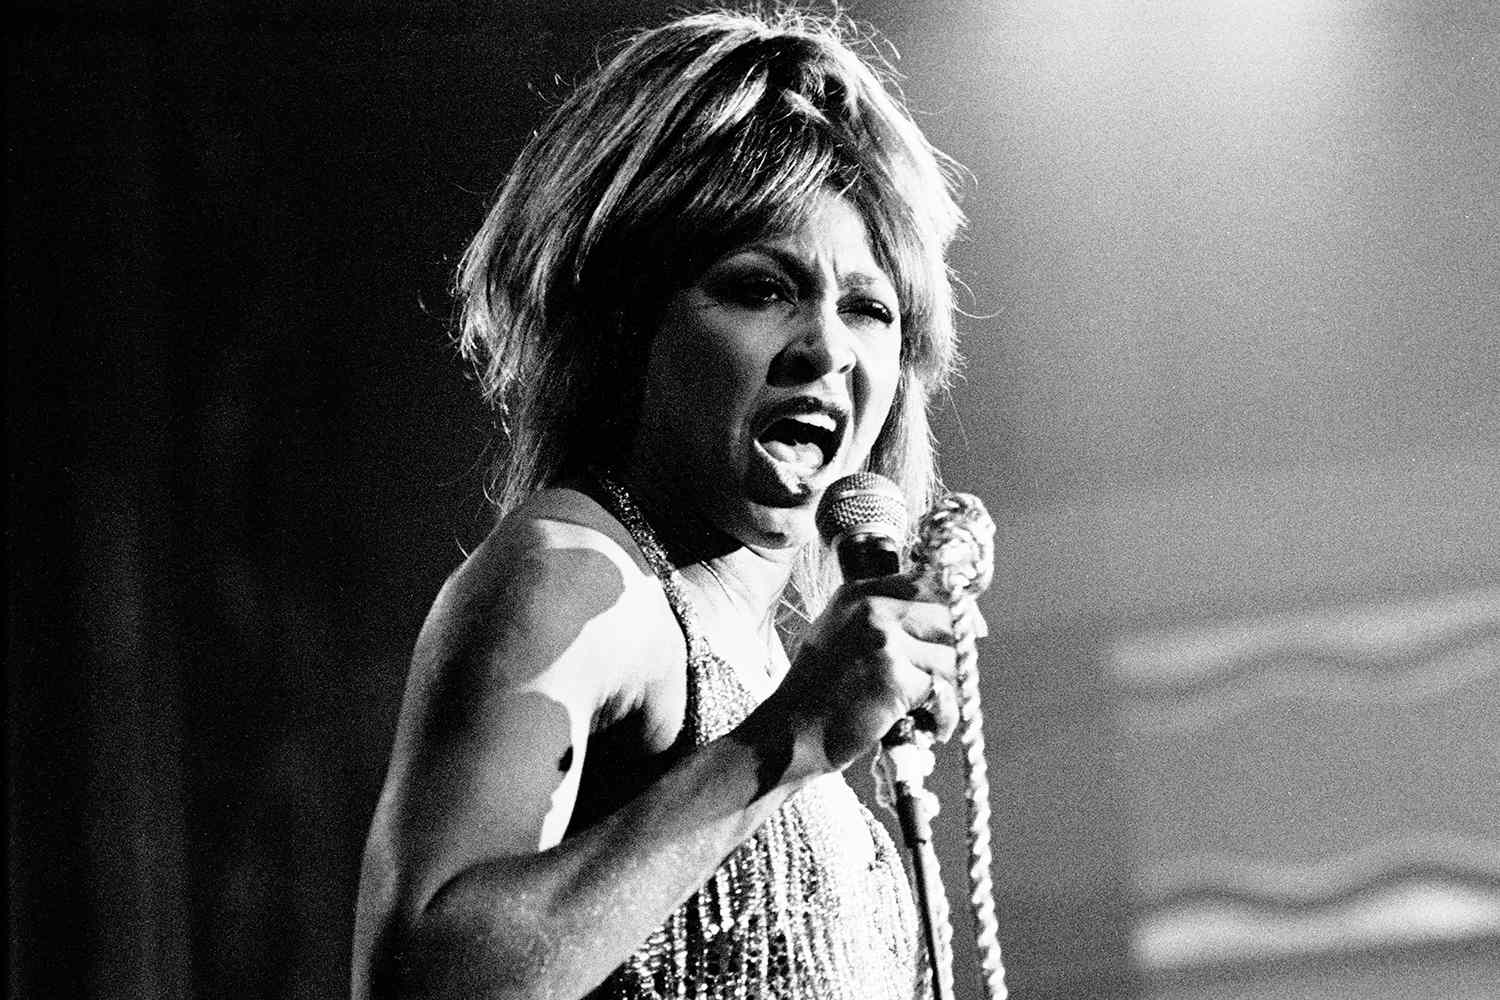 Tina Turner Revealed Psychic Predicted She’d Be a Star After Leaving Abusive Marriage in This 1981 PEOPLE Exclusive